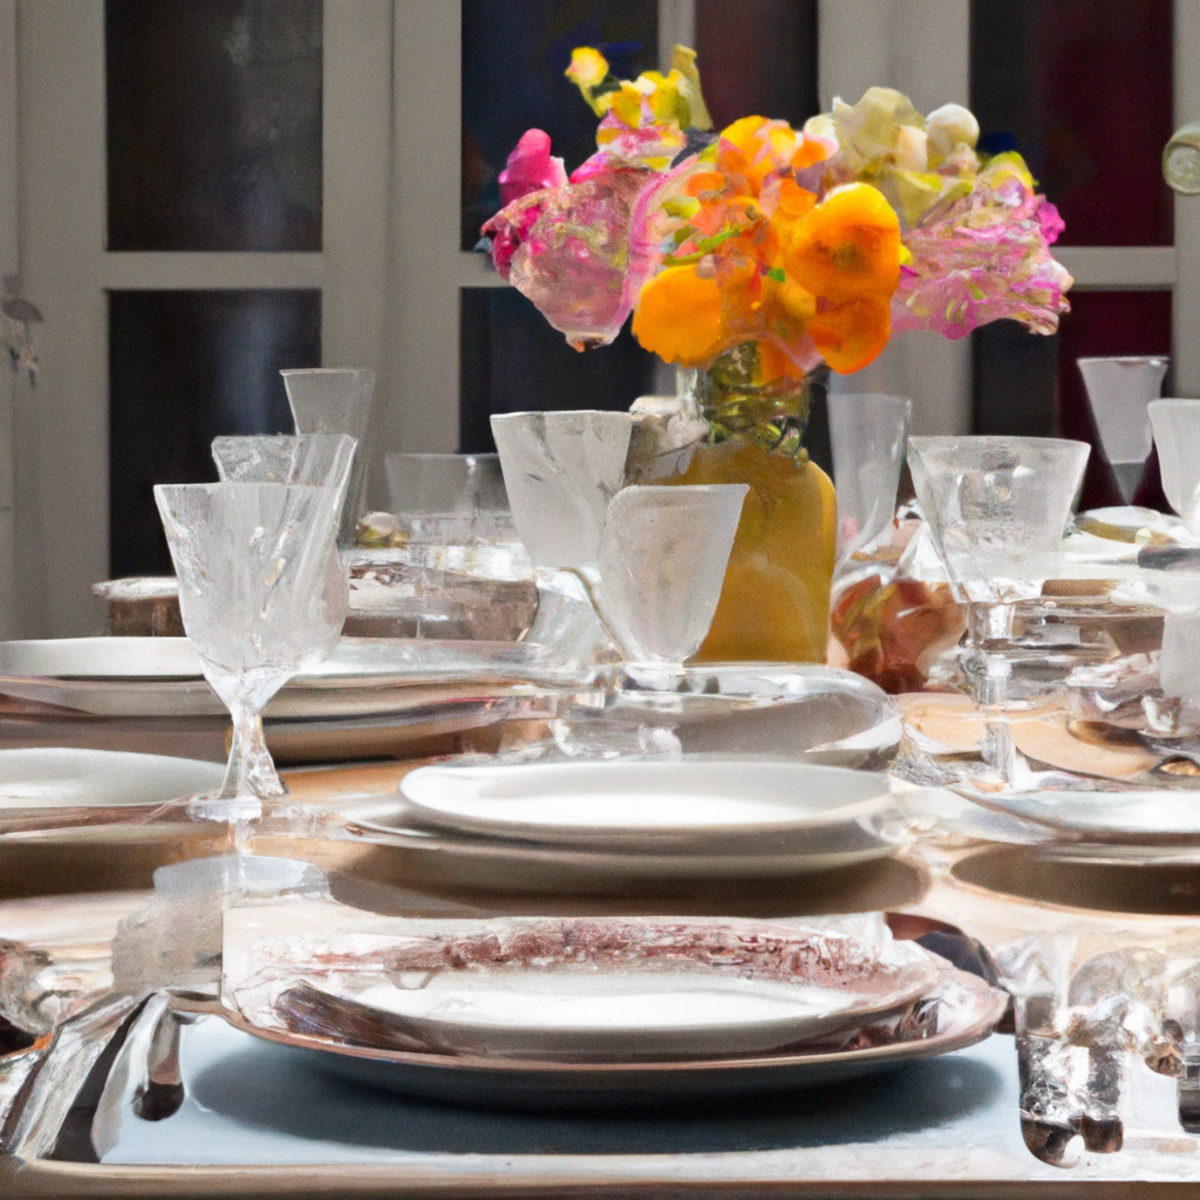 Well-arranged dining table with elegant porcelain plates, silverware, crystal-clear glasses, and vibrant flowers